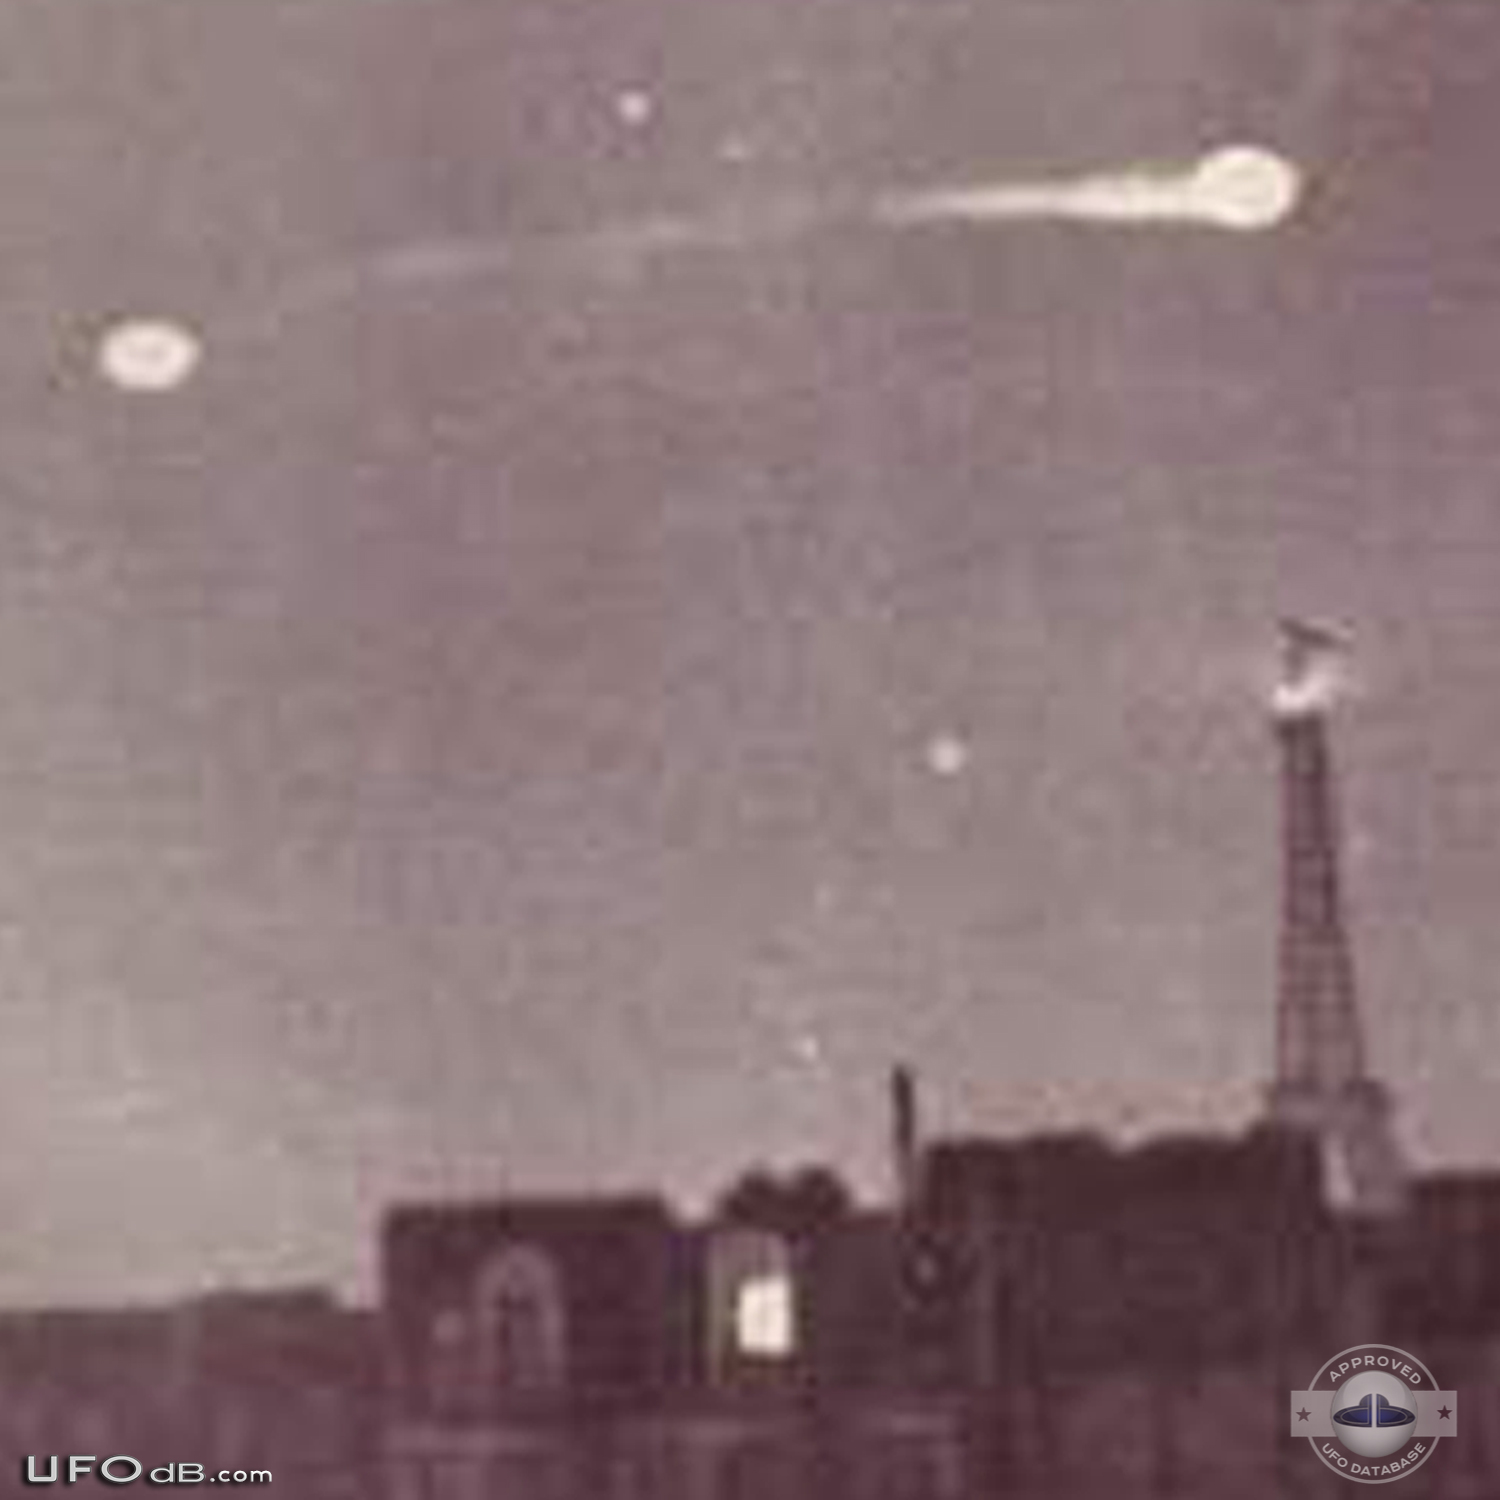 Old 1953 UFO sighting picture caught over Paris, France UFO Picture #543-4